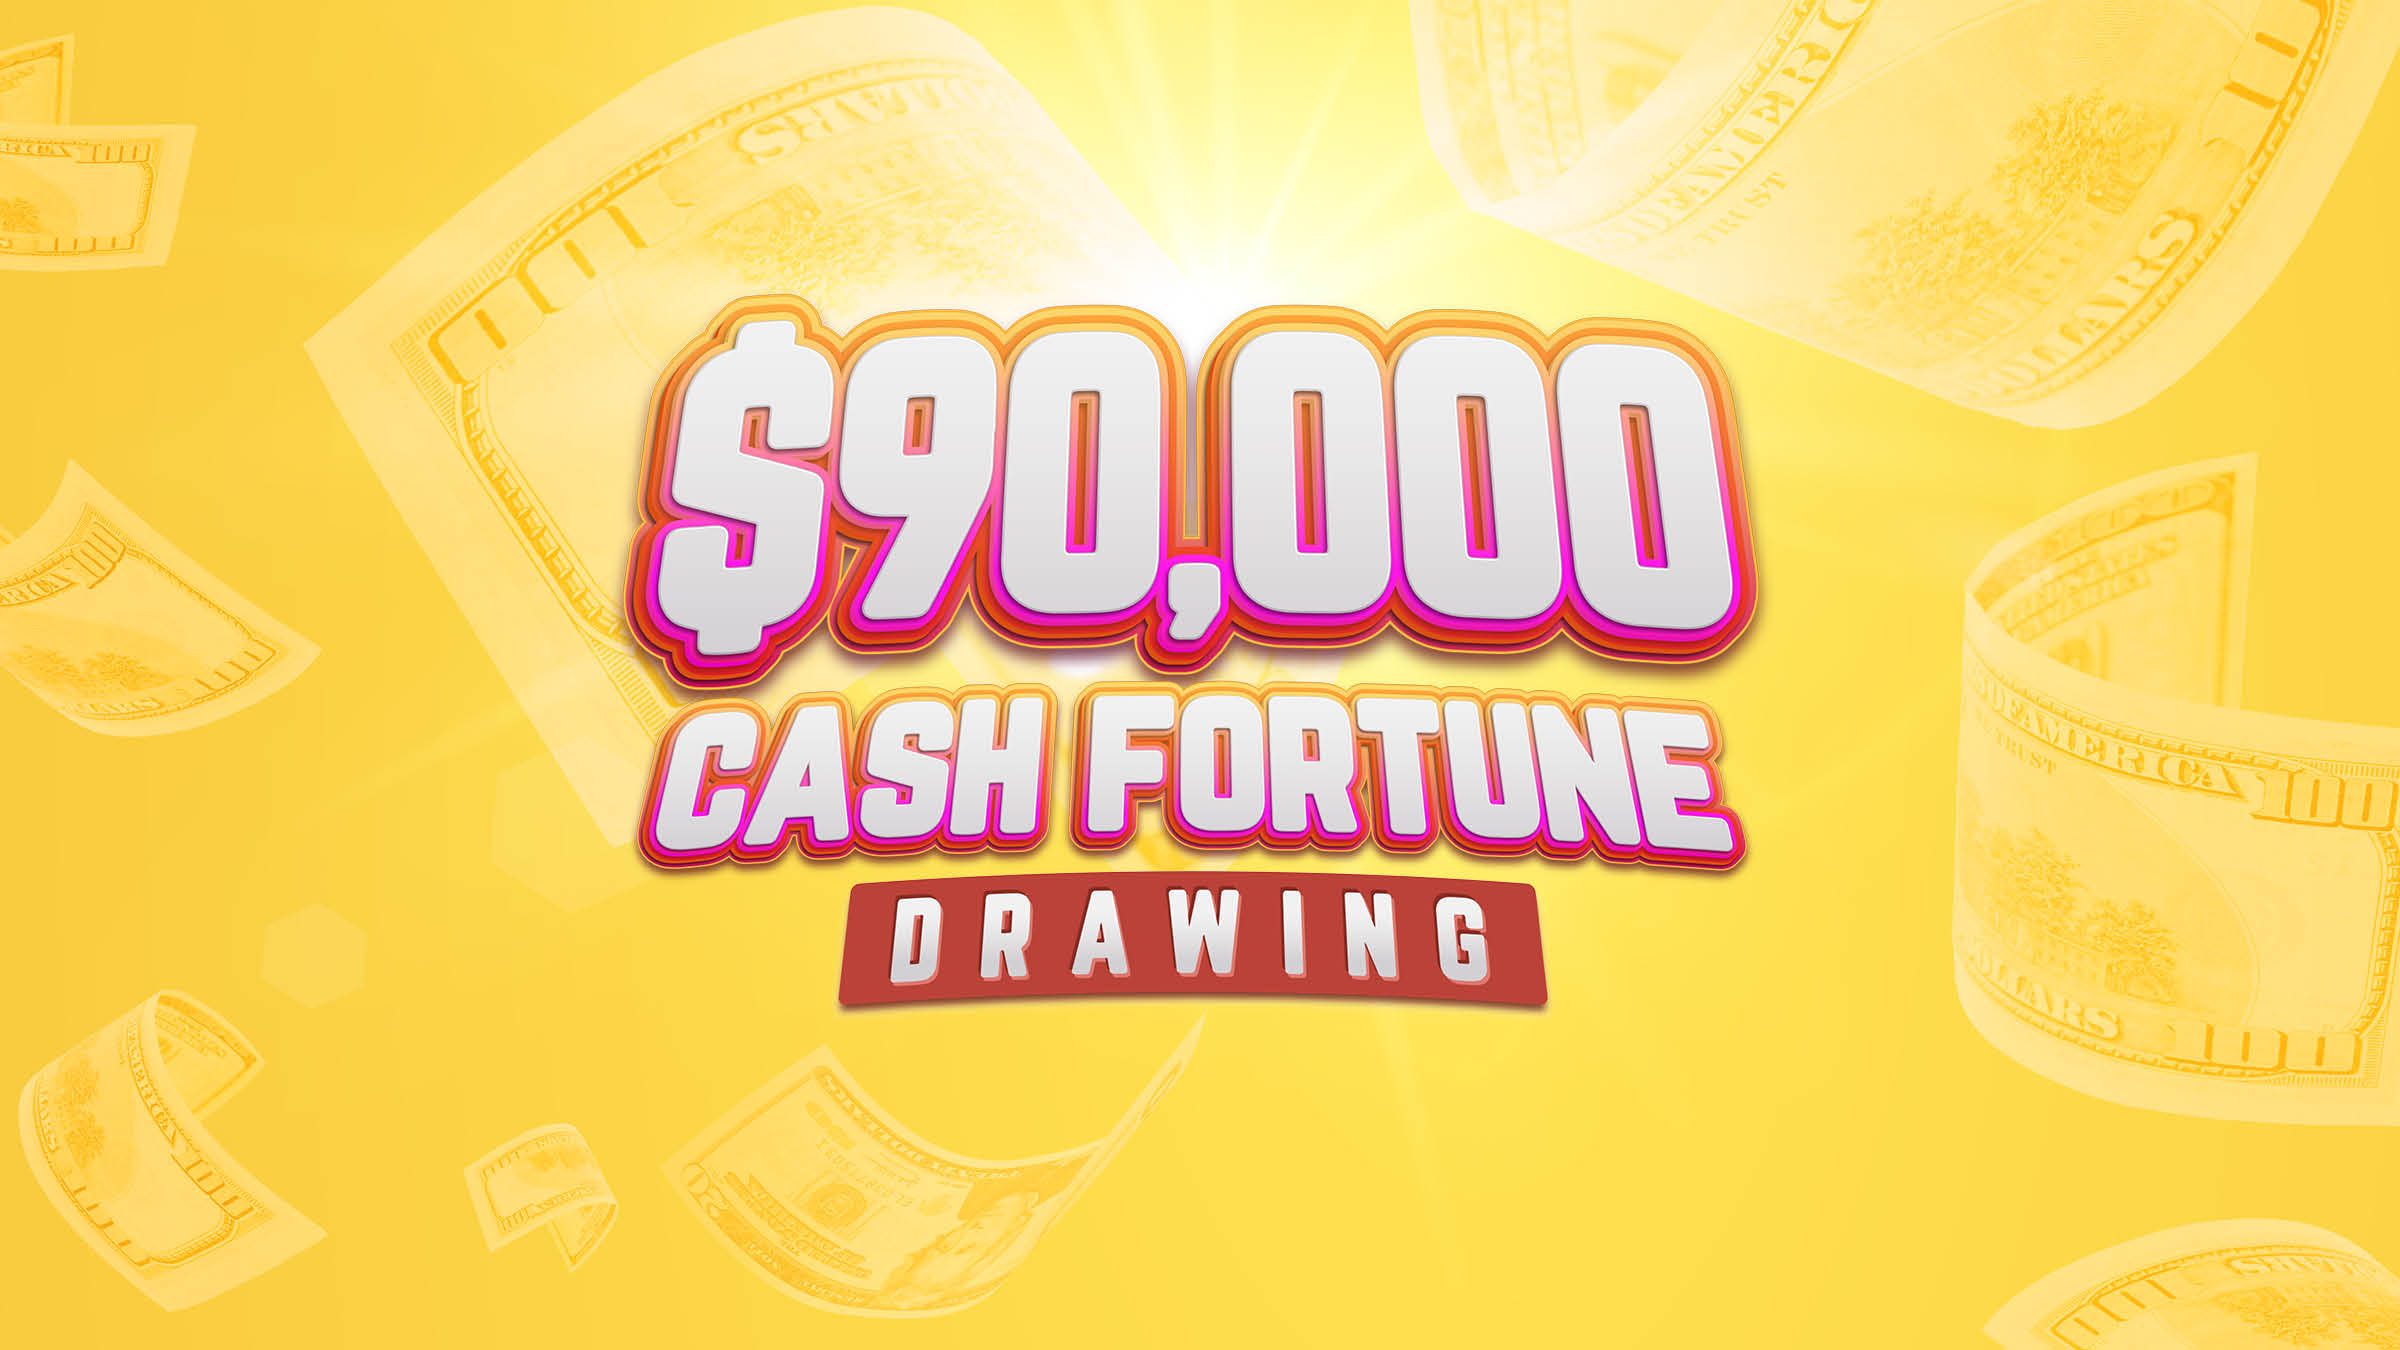 $90,000 CASH FORTUNE DRAWING